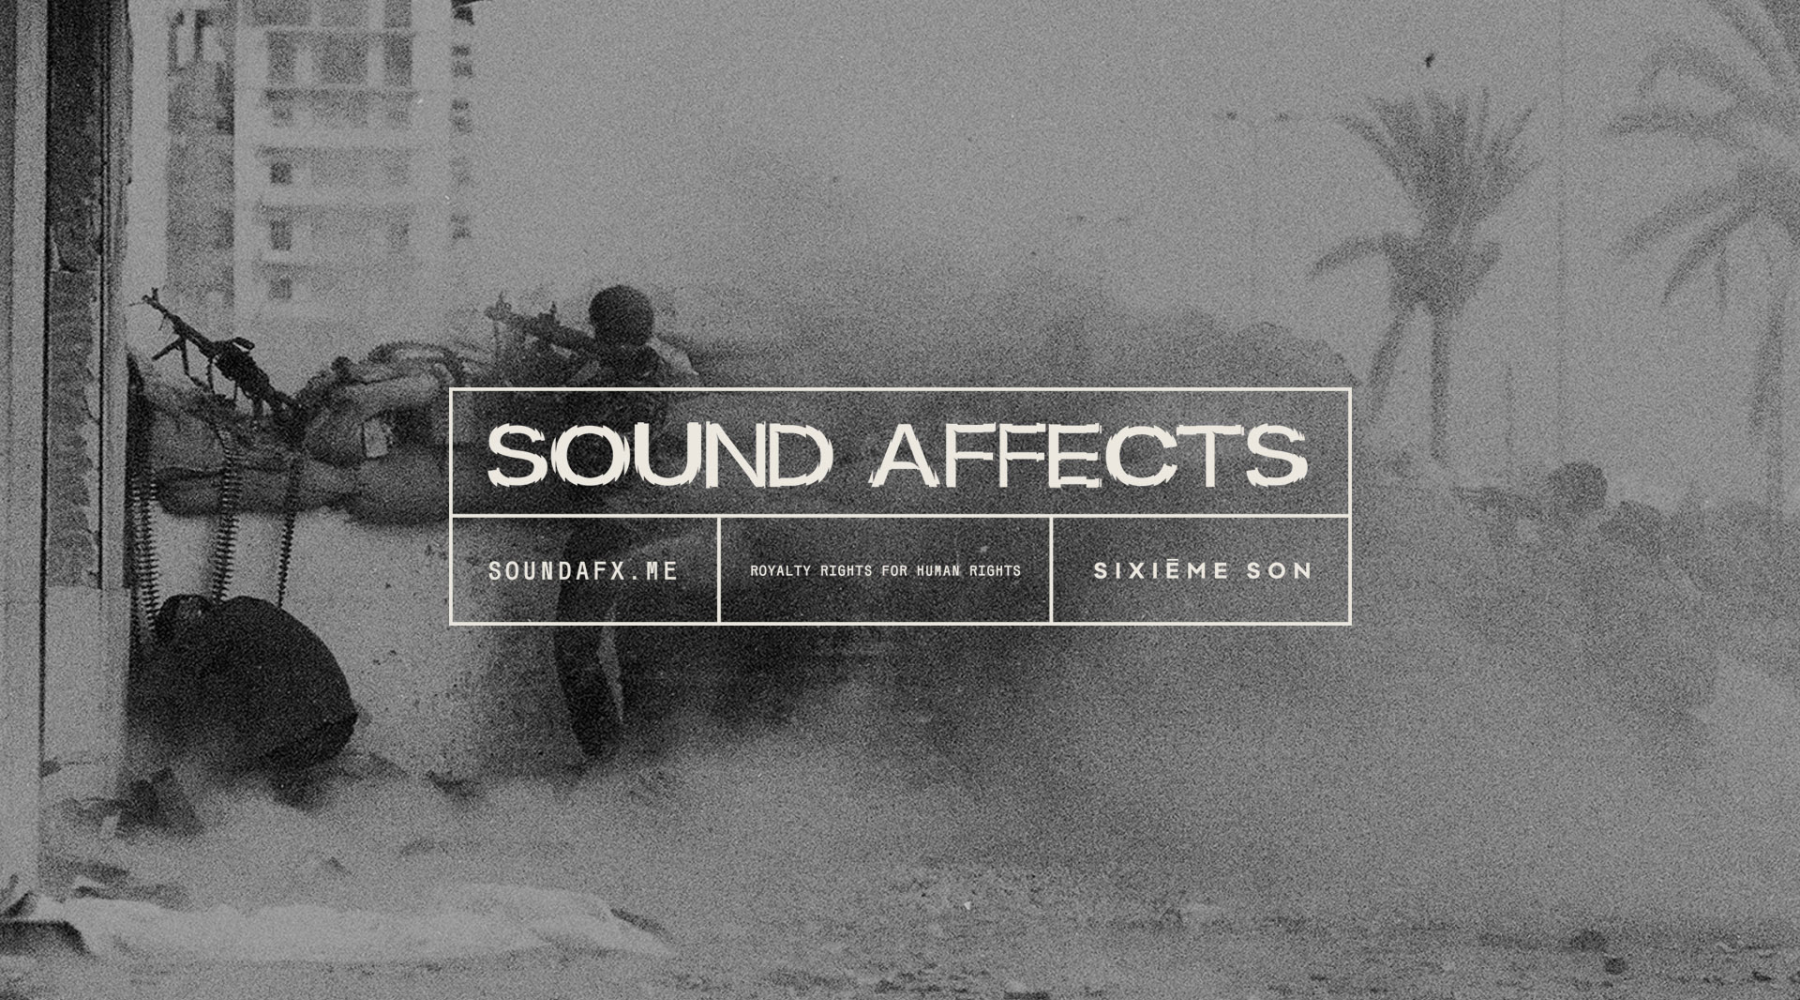 'Sound Affects': a First-of-its-kind Campaign for Victims of PTSD